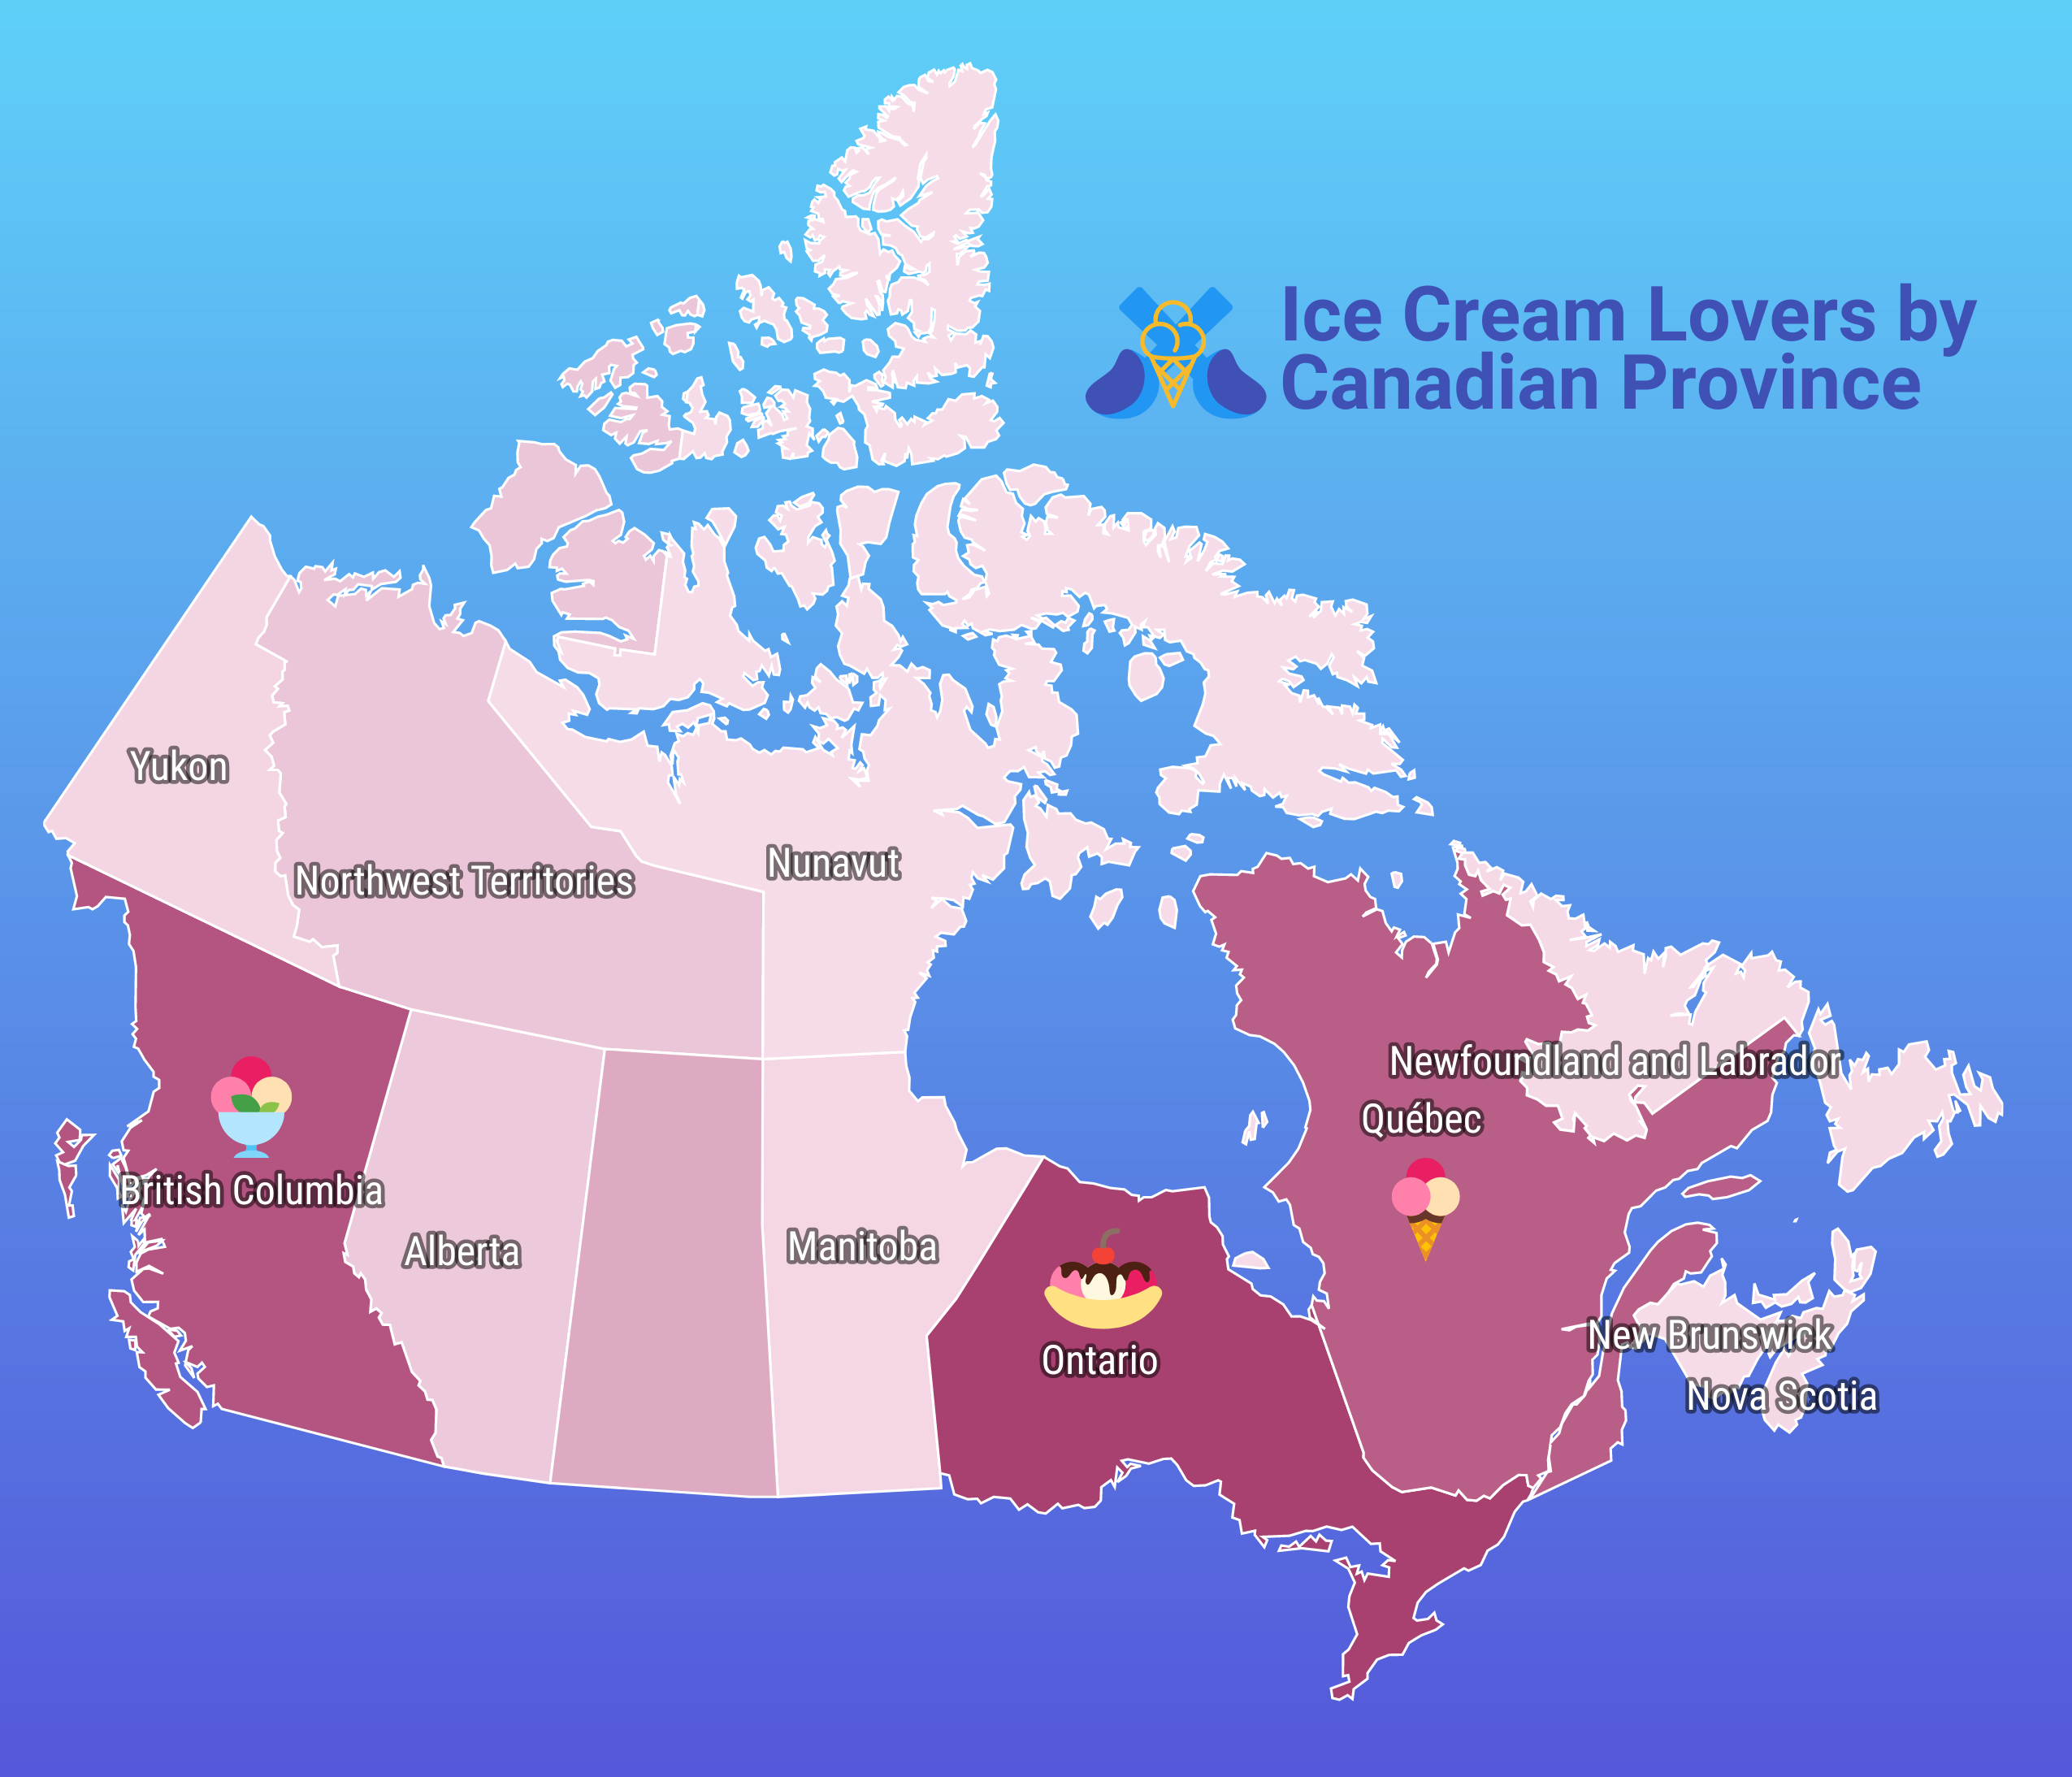 A choropleth map of Canada titled 'Ice Cream Lovers by Canadian Province'. The names of the provinces appear over each one in white text outlined in black, and the provinces themselves are colored different shades in a gradient from dark to light pink. The darkest colored provinces have icons of ice cream cones and sundaes on them. The background is a light to dark blue gradient.